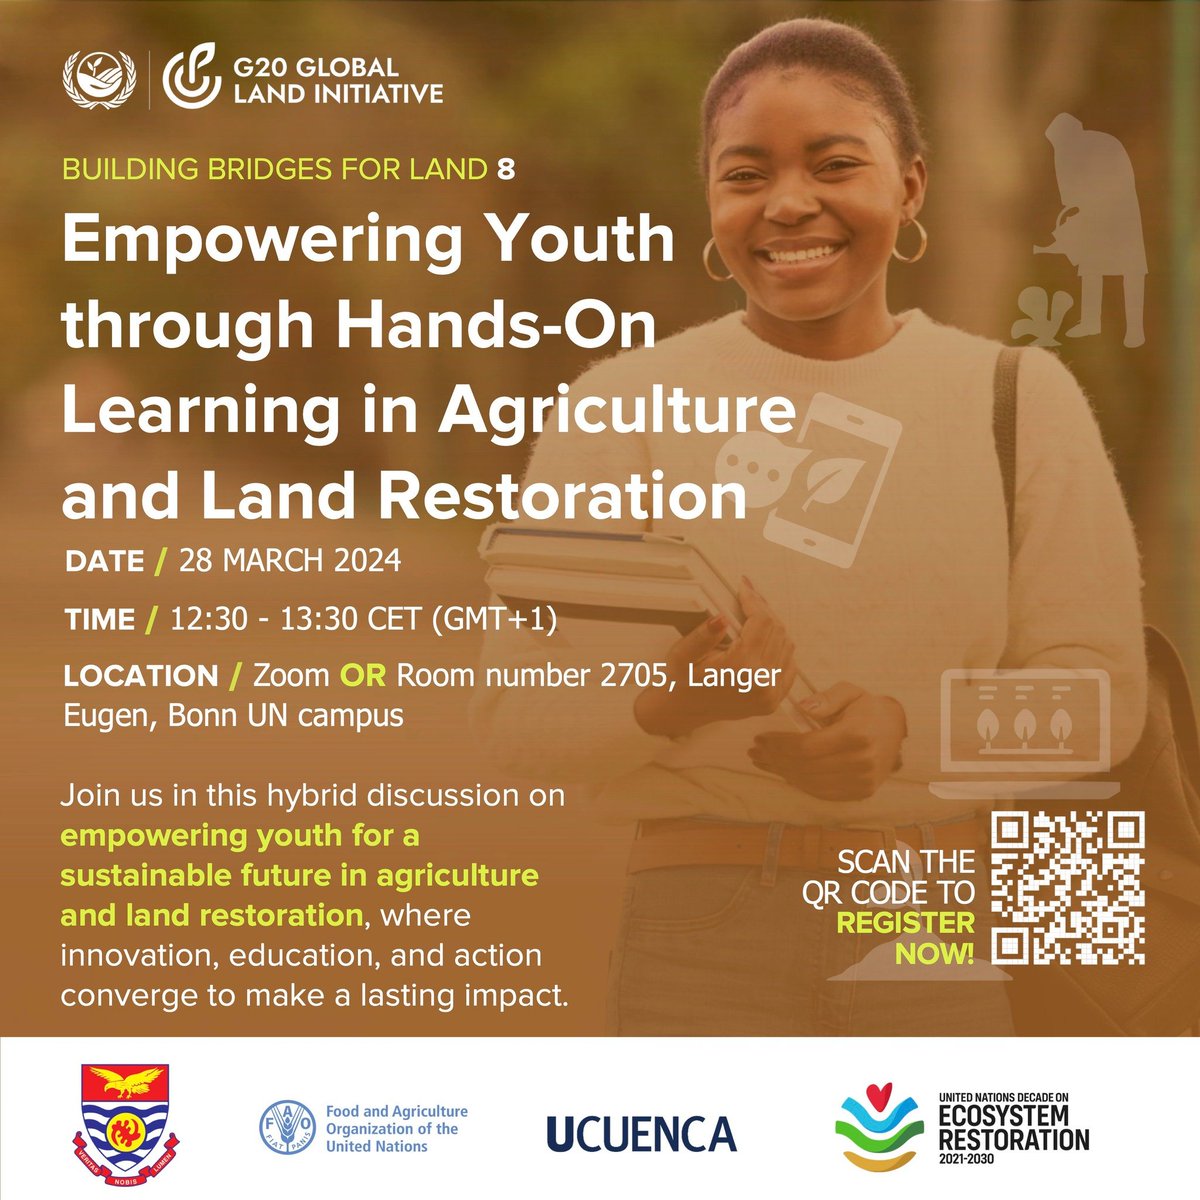 📢TODAY! Don't miss our webinar on 'Empowering Youth Through Hands-on Learning in Agriculture and Land Restoration'! Register here 👉 bit.ly/48B0u63 #UNited4Land